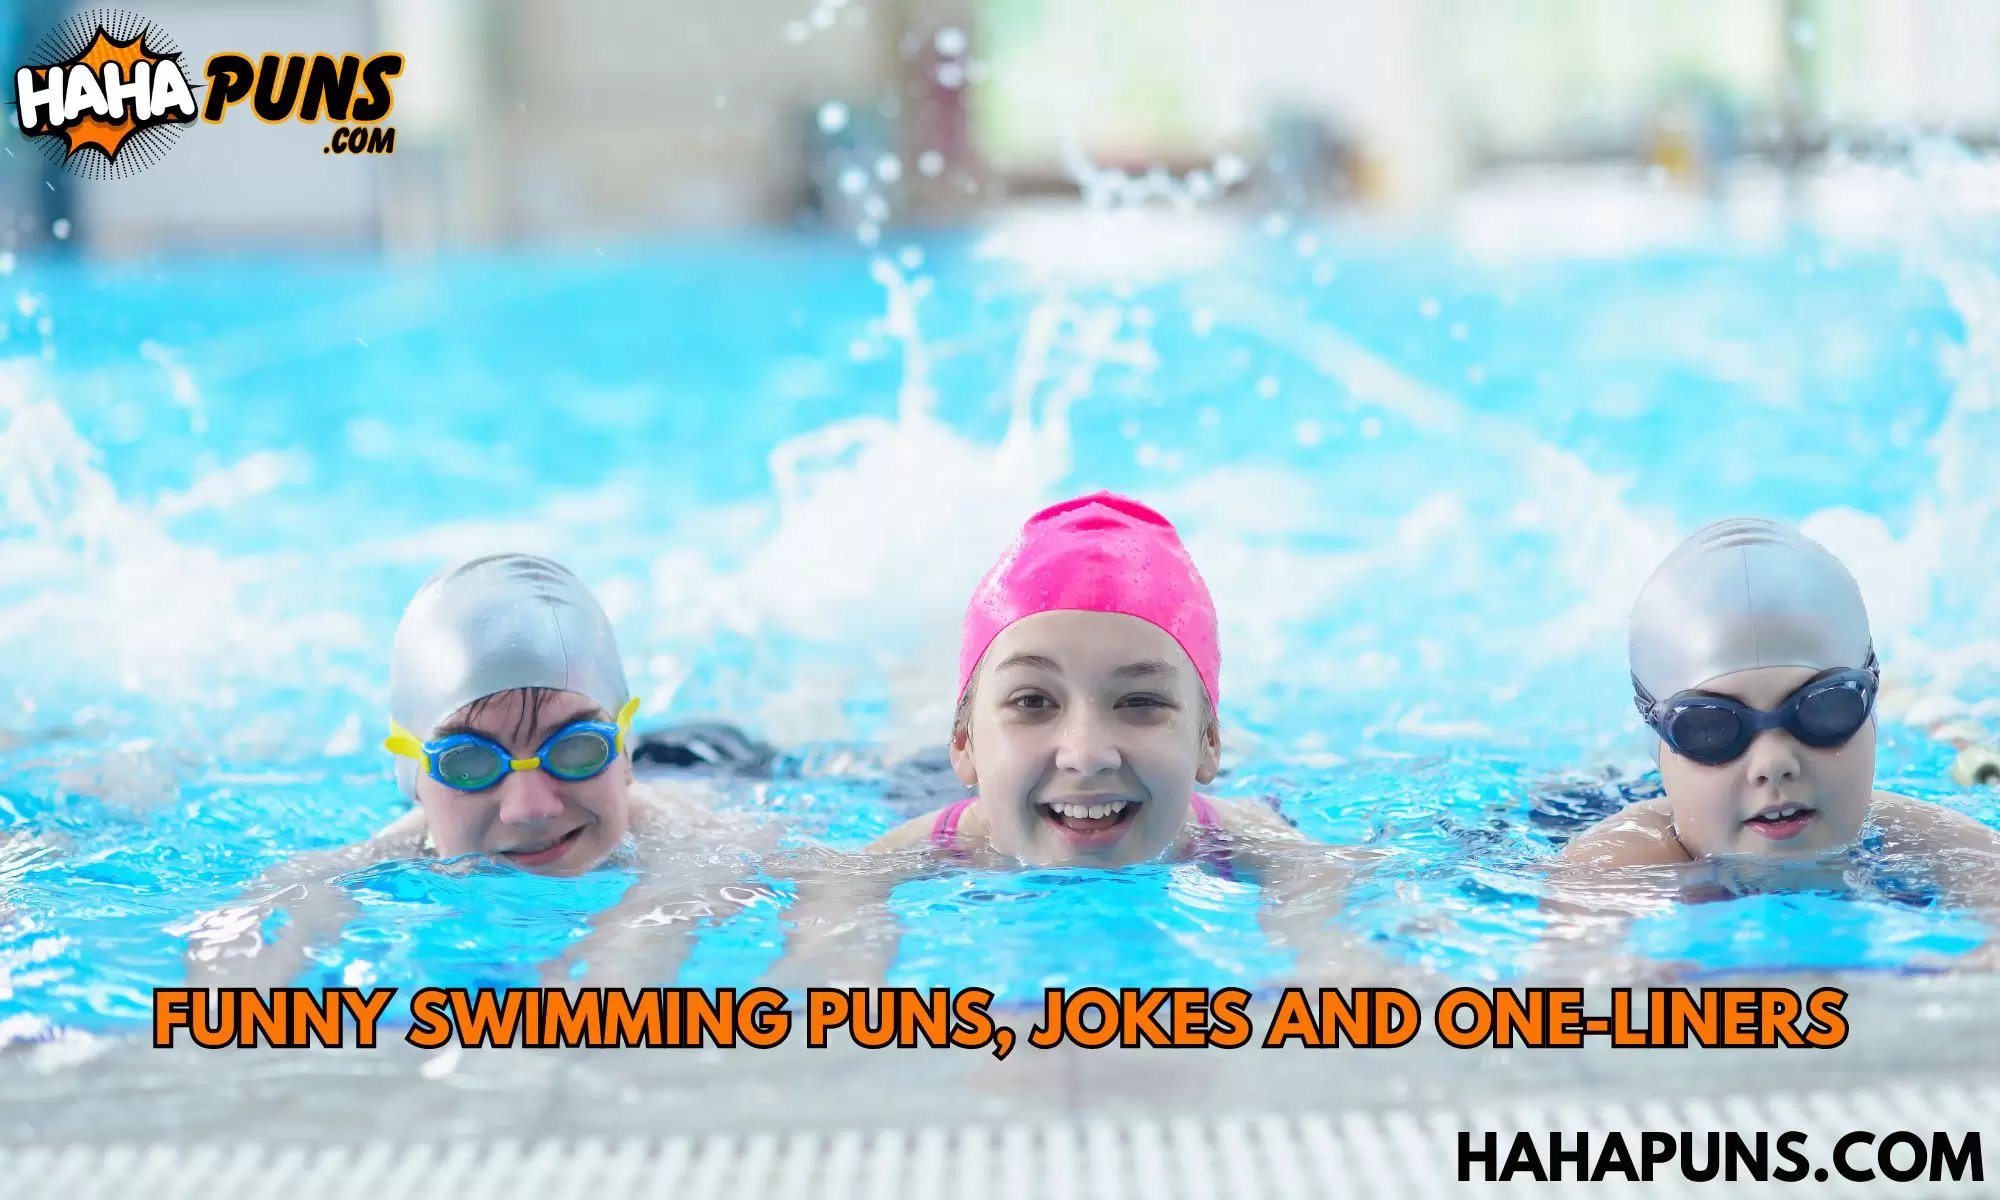 Funny Swimming Puns, Jokes And One-Liners